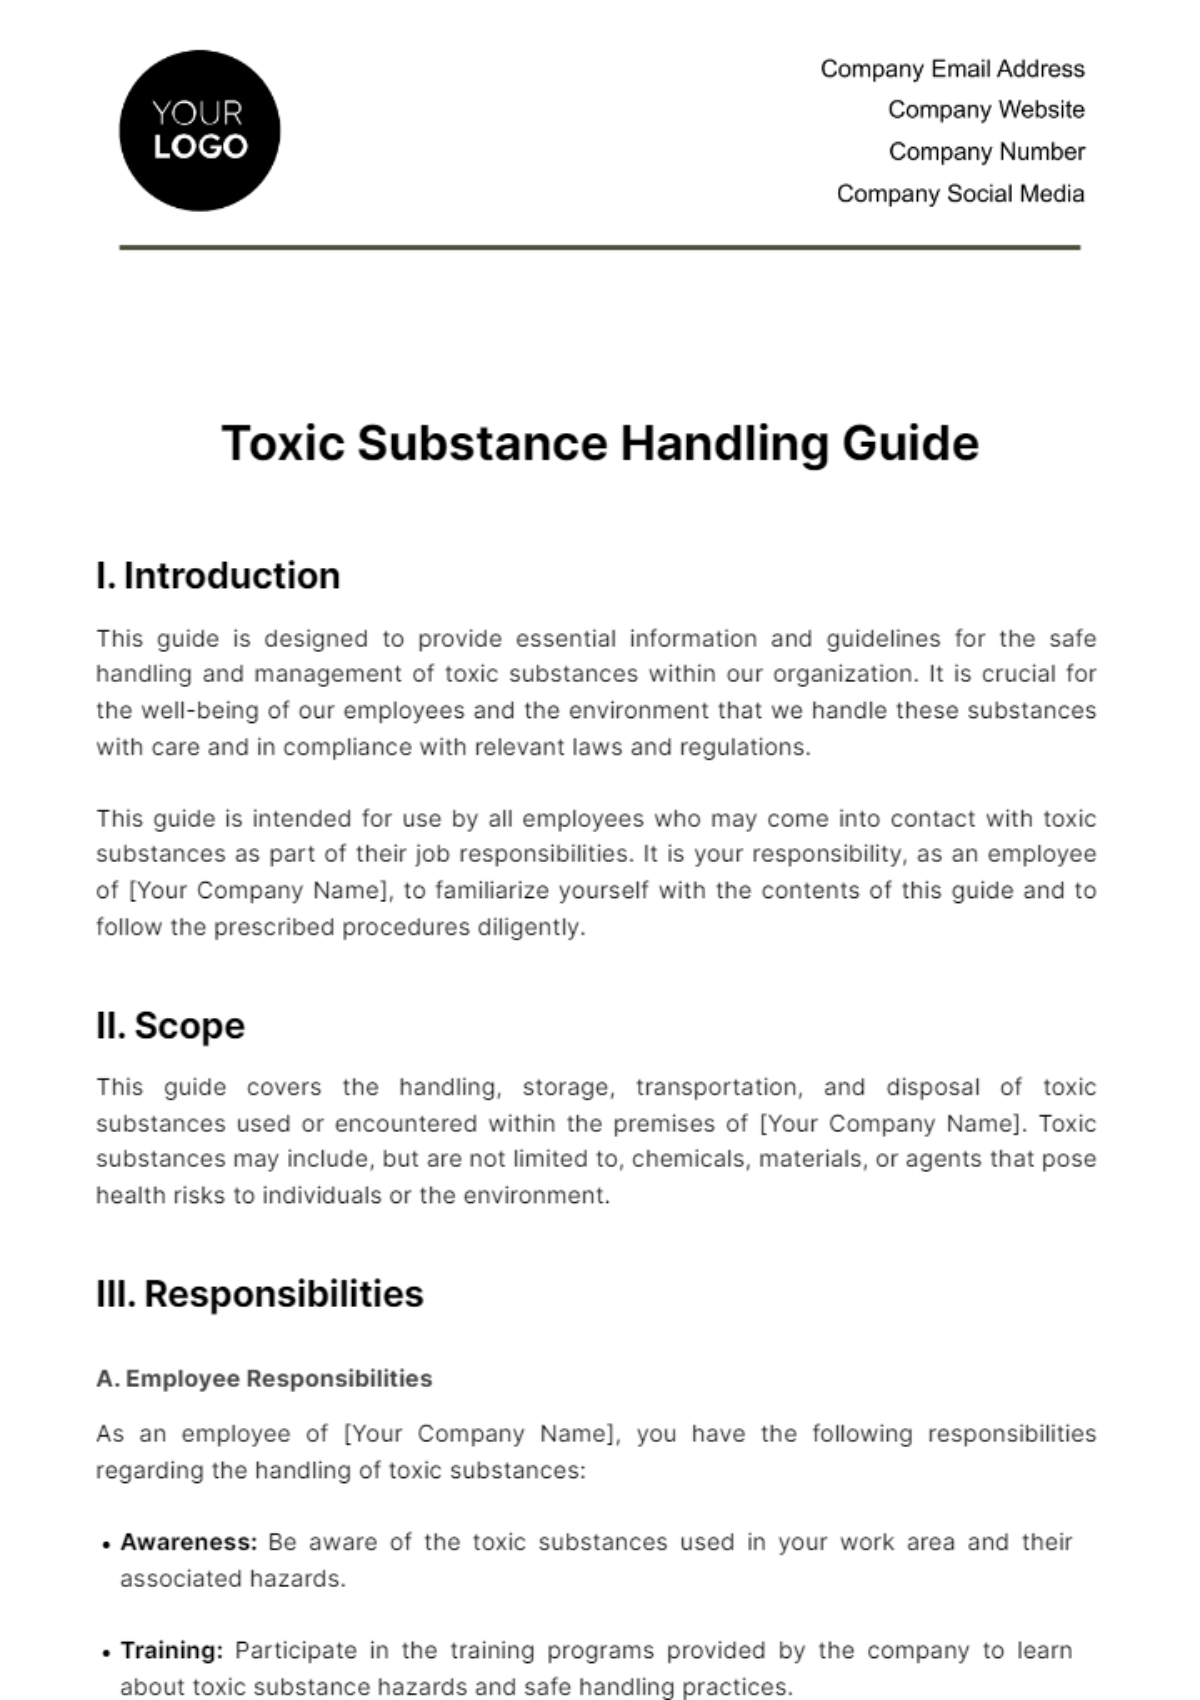 Toxic Substance Handling Guide HR Template